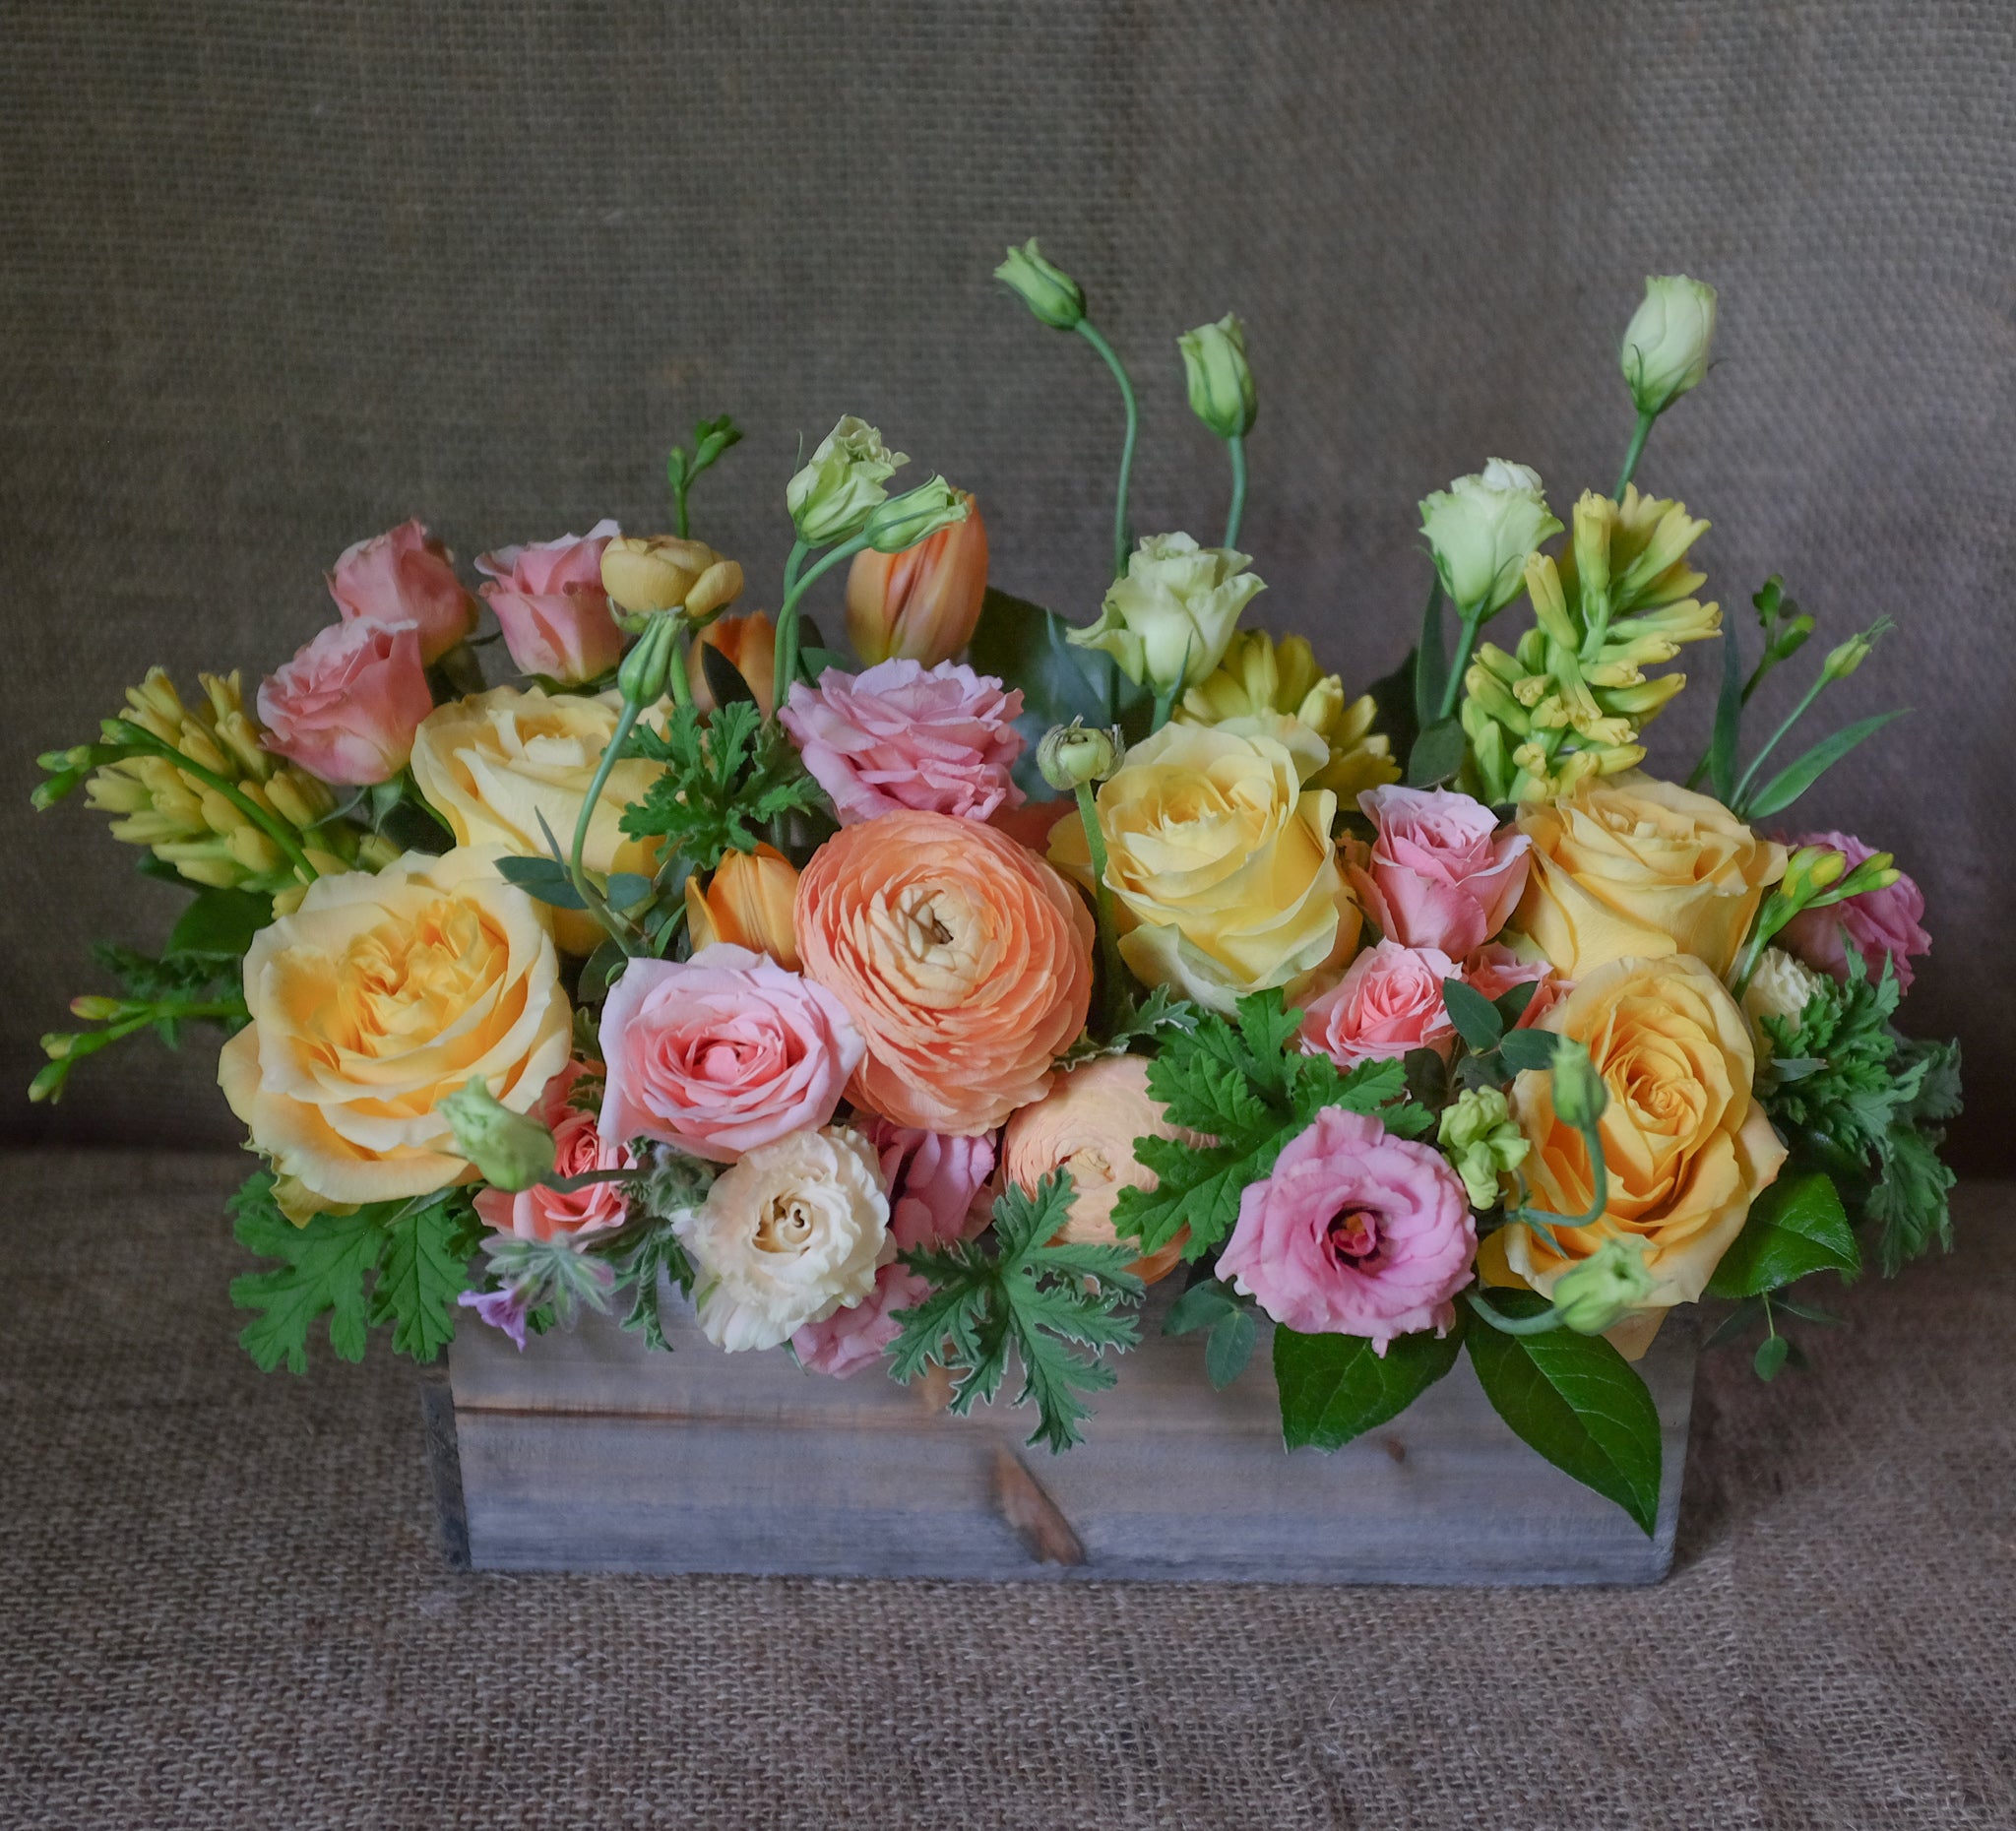 Pastel flowers arranged in a wooden box by Michlers Florist.